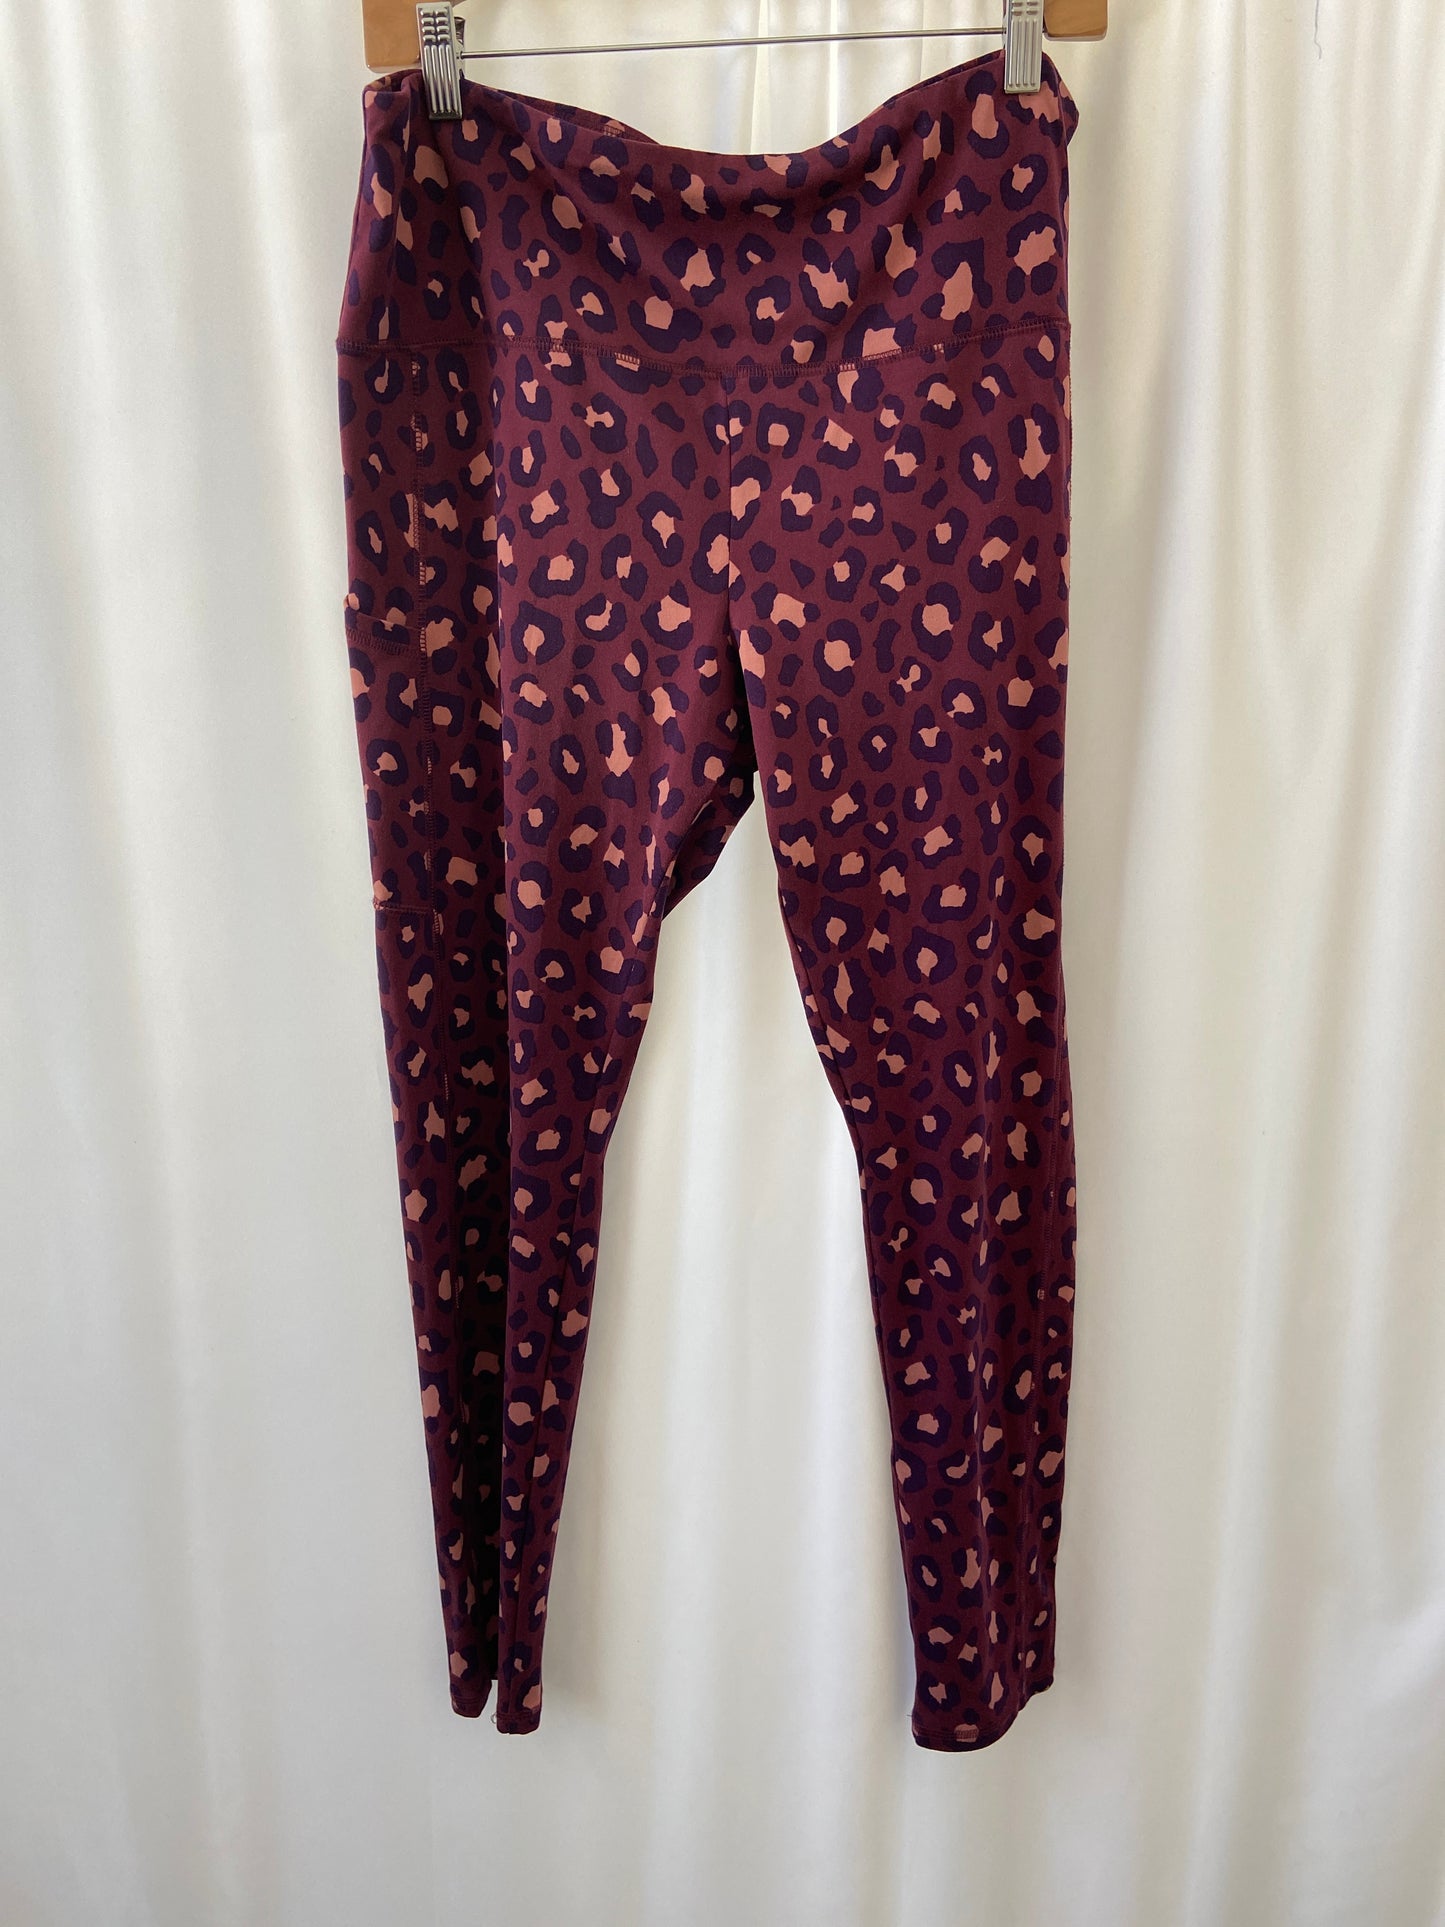 Athletic Leggings By Wild Fable  Size: 1x